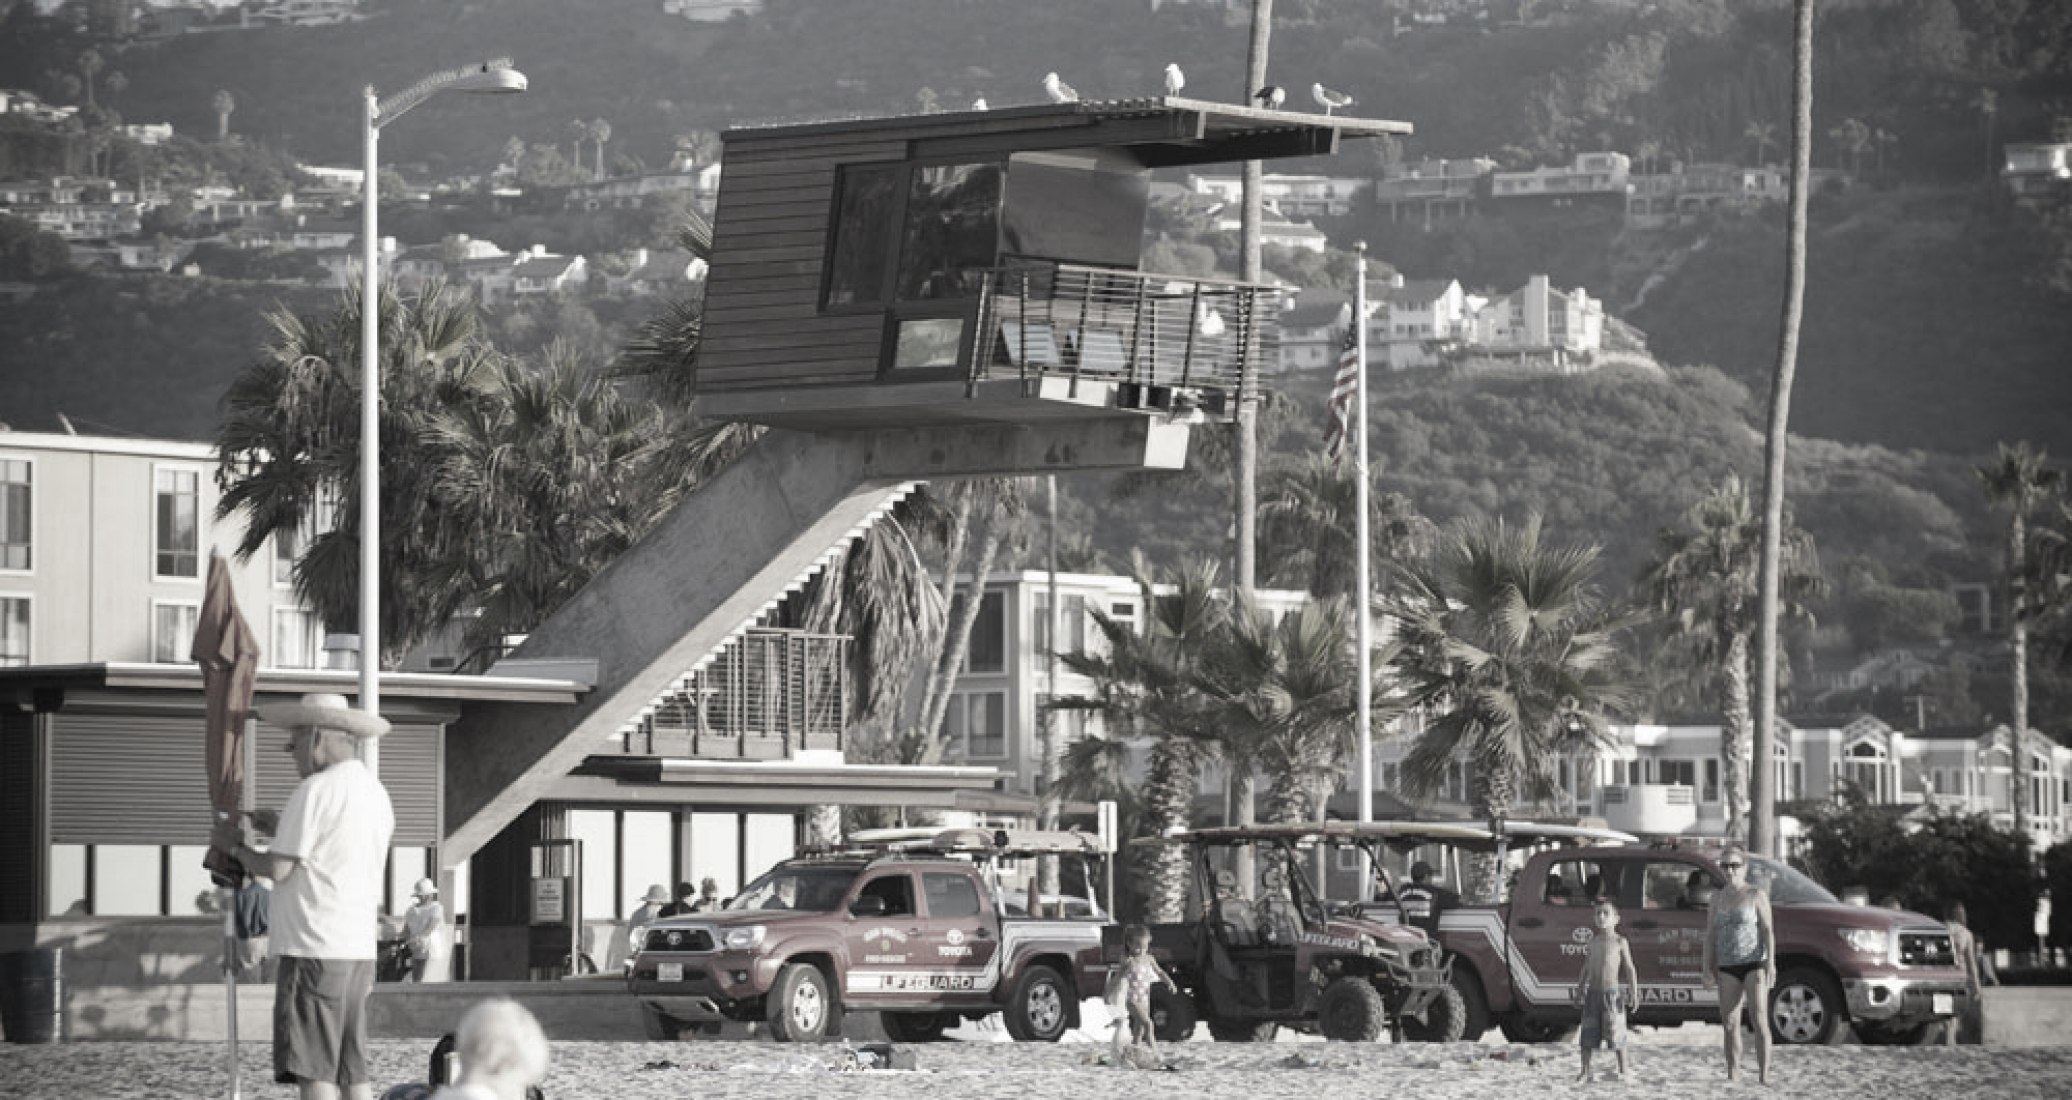 Surveillance hut and stairs from the beach. La Jolla Shores Lifeguard Station by RNT Architects. Image courtesy of RNT Architects.